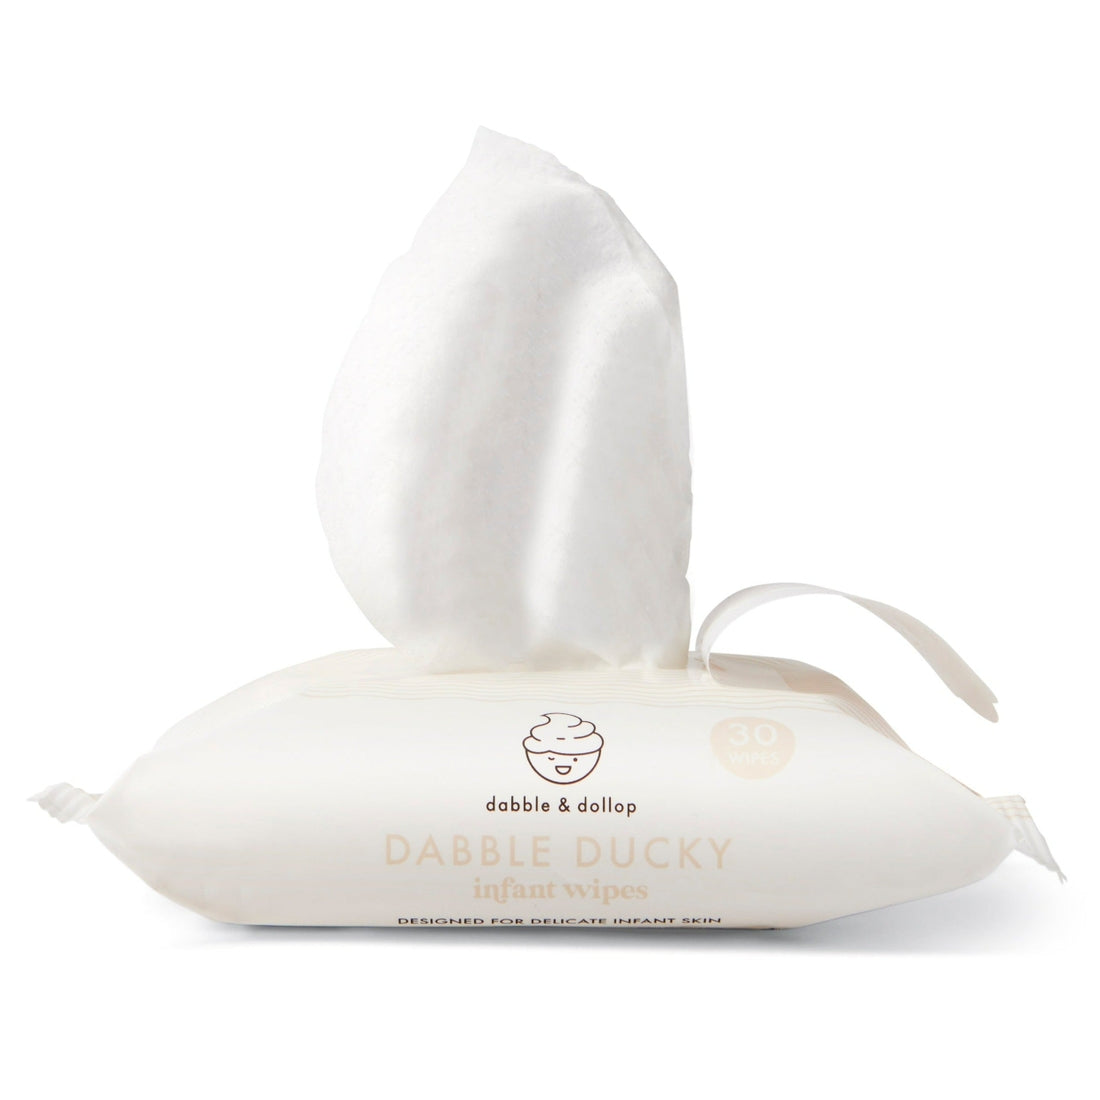 Dabble Ducky Infant Wipes